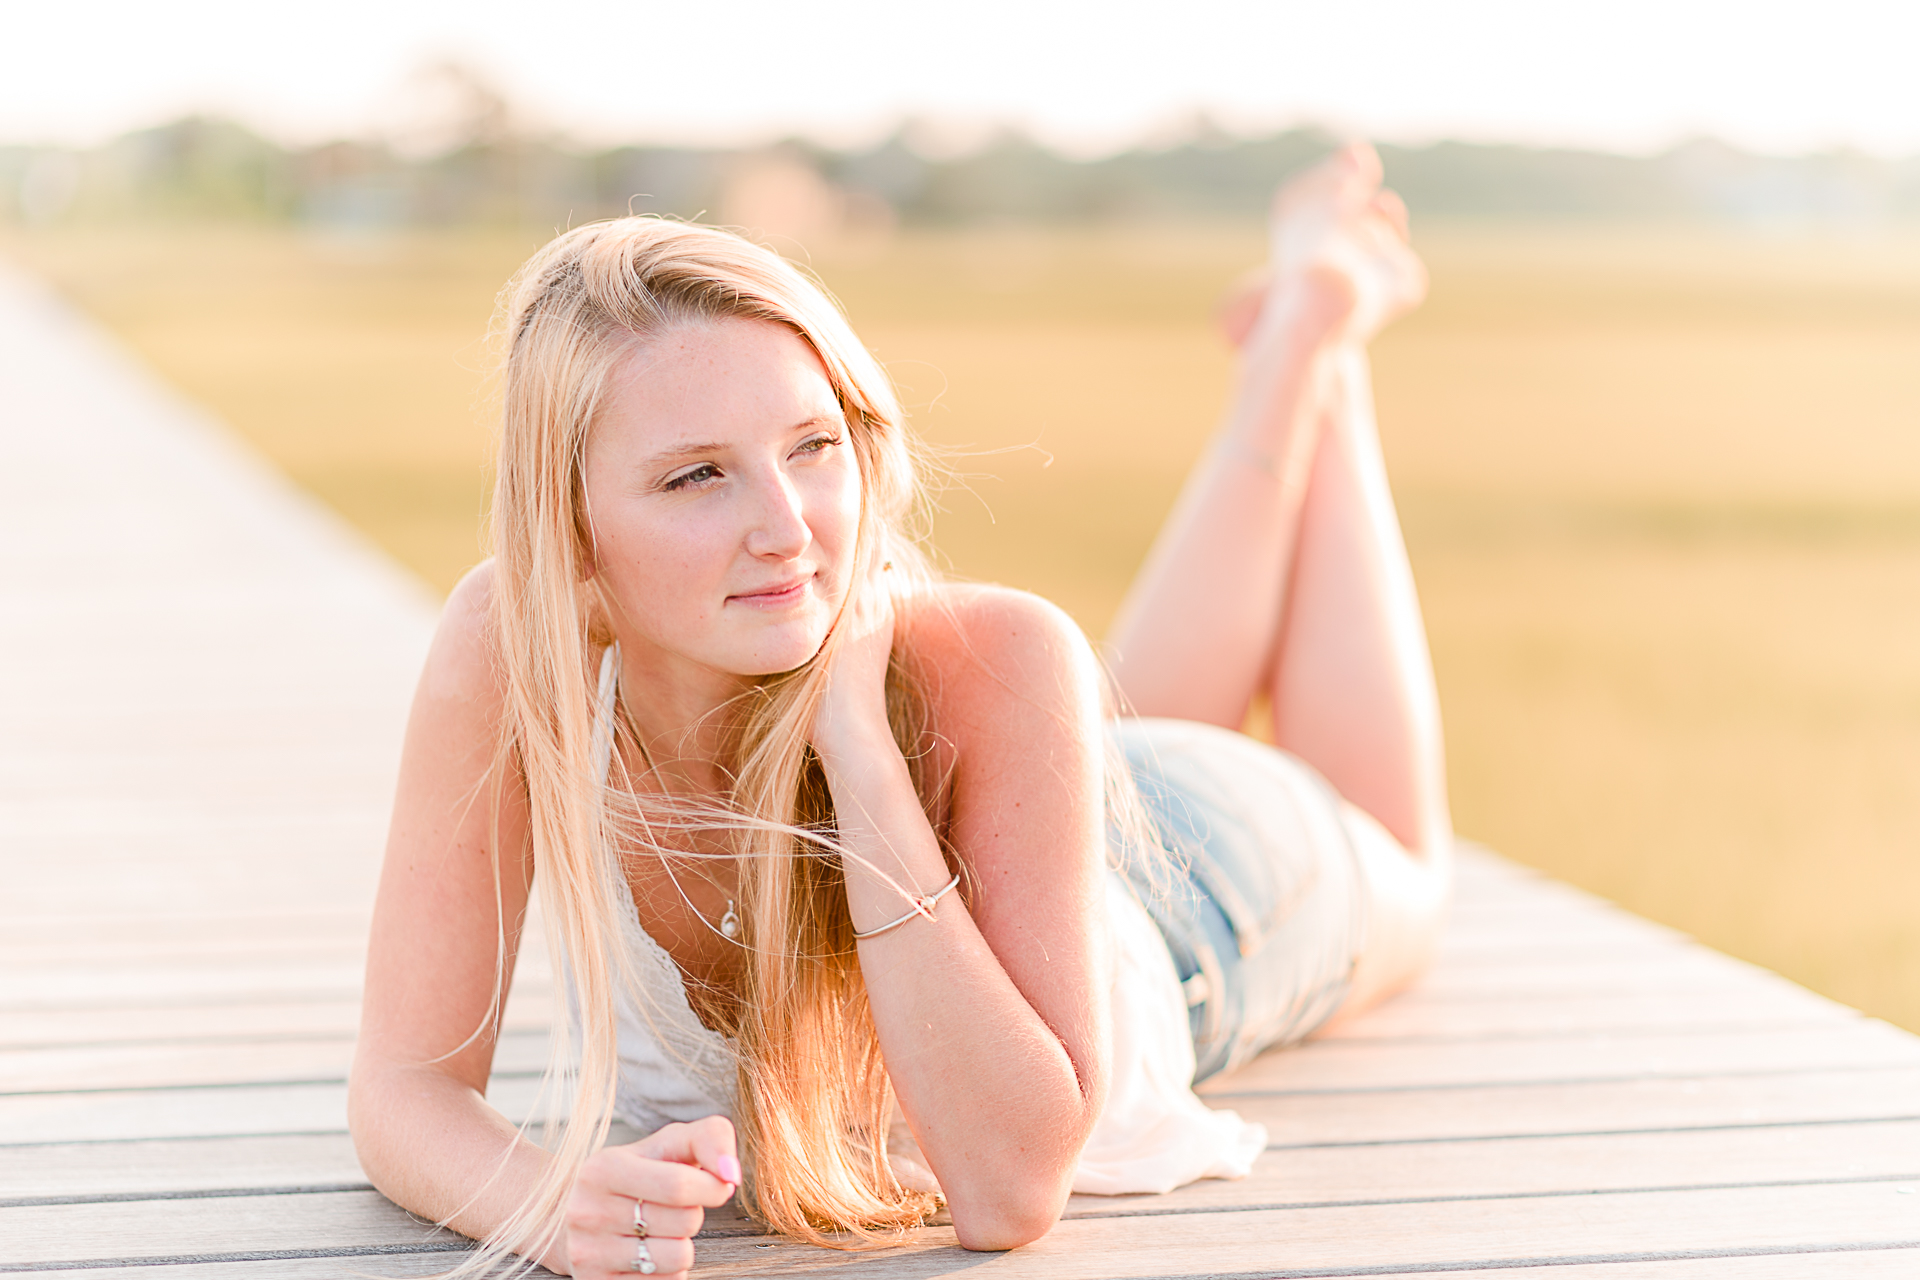 Photo by Cape Cod Senior Portrait Photographer Christina Runnals | High school senior girl laying on her stomach on a boardwalk looking away from the camera